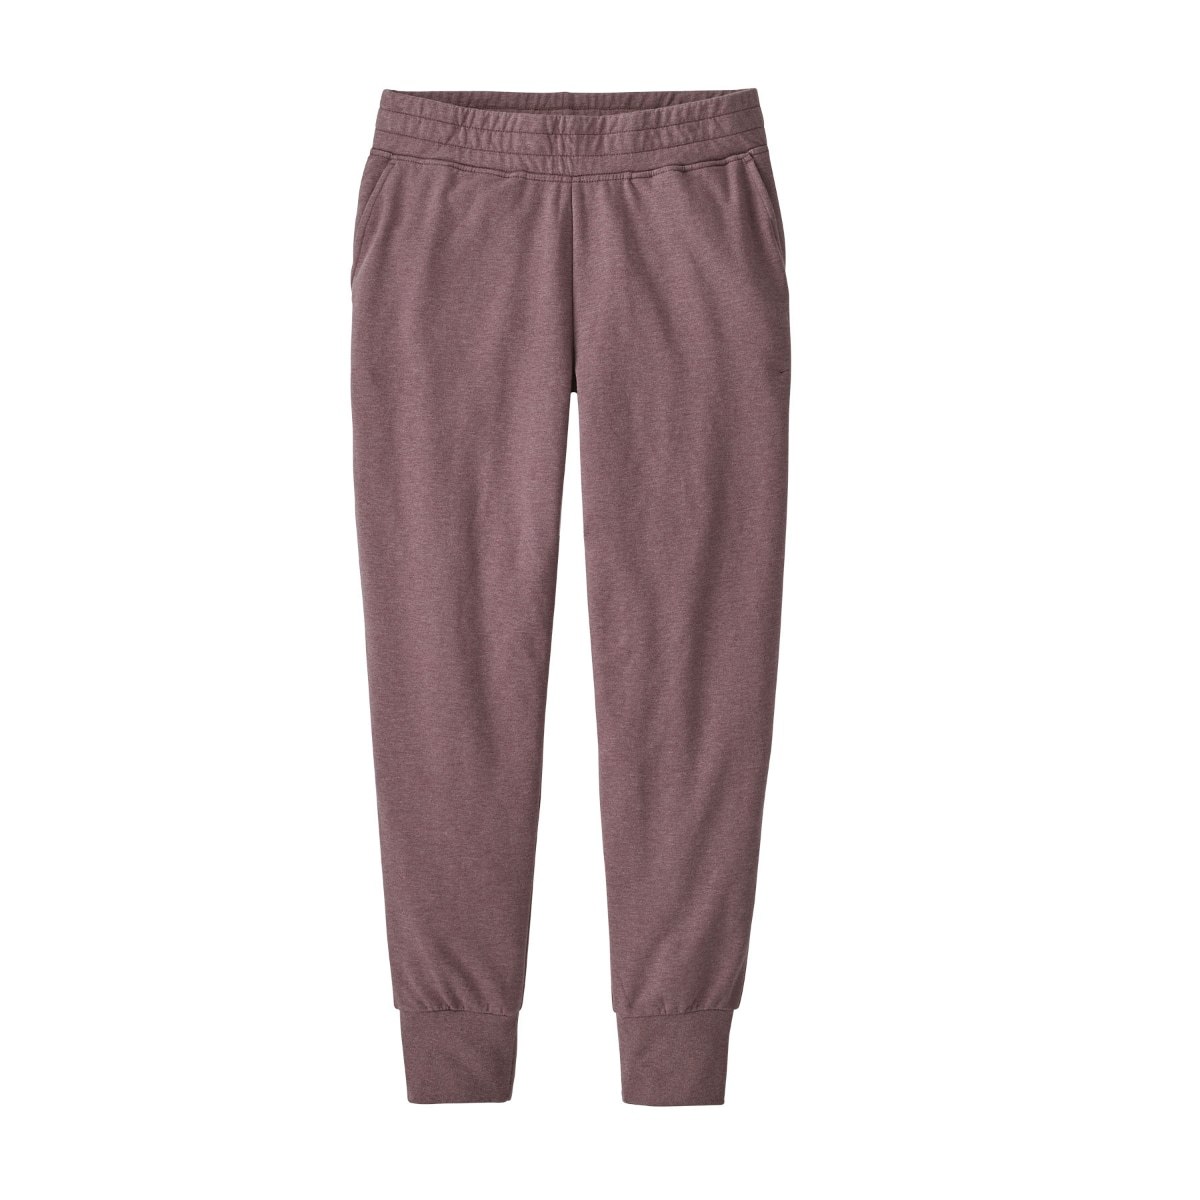 Ahnya Pants - Women's by Patagonia Online, THE ICONIC